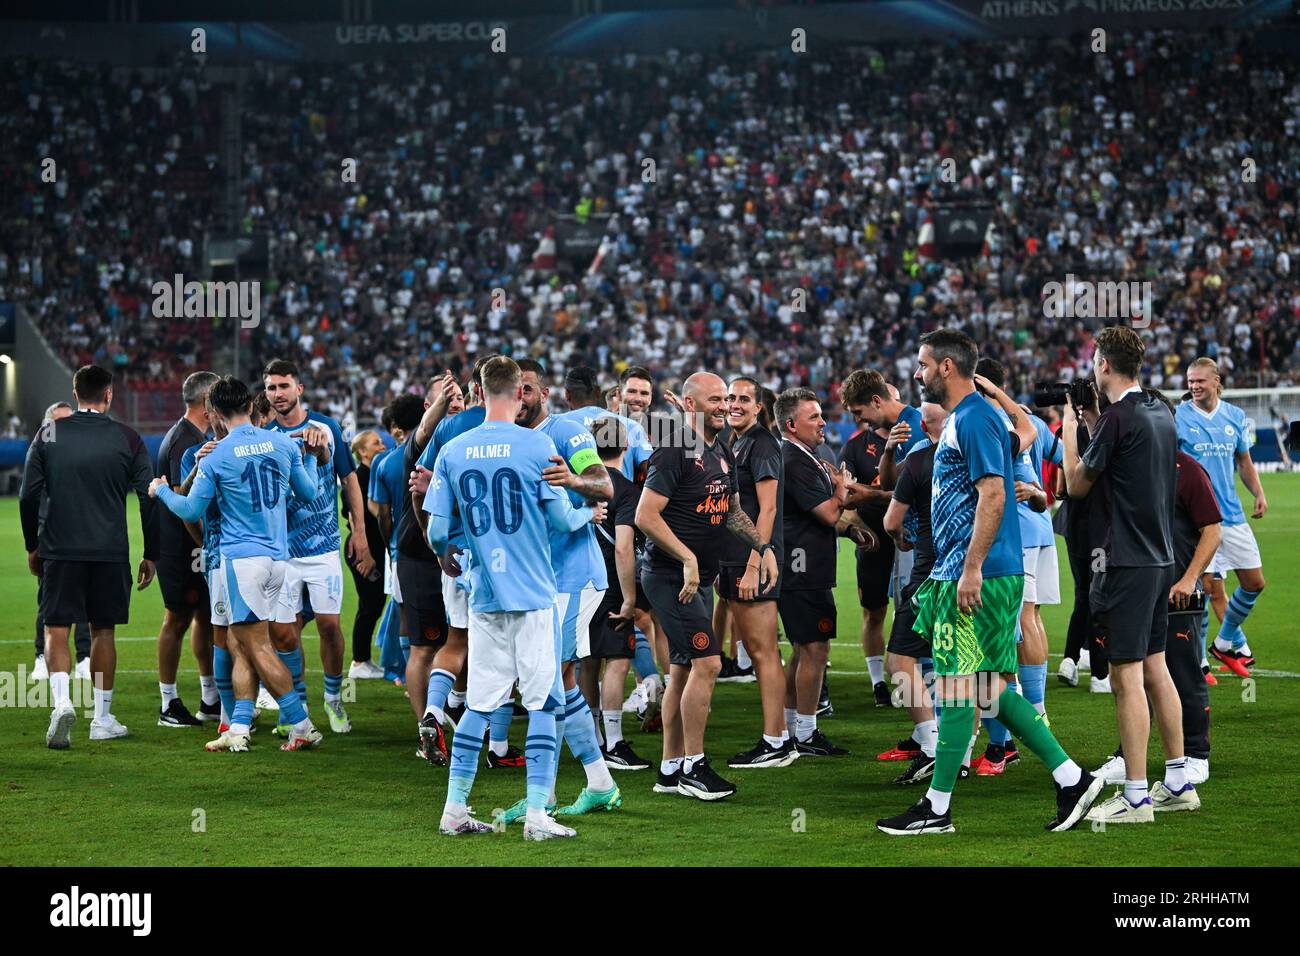 Piraeus, Greece. 16 August, 2023: The team of Manchester City celebrate the victory during the UEFA Super Cup 2023 match between Manchester City FC and Sevilla FC at Georgios Karaiskakis Stadium in Piraeus, Greece. August 16, 2023. (Photo by Nikola Krstic/Alamy) Stock Photo